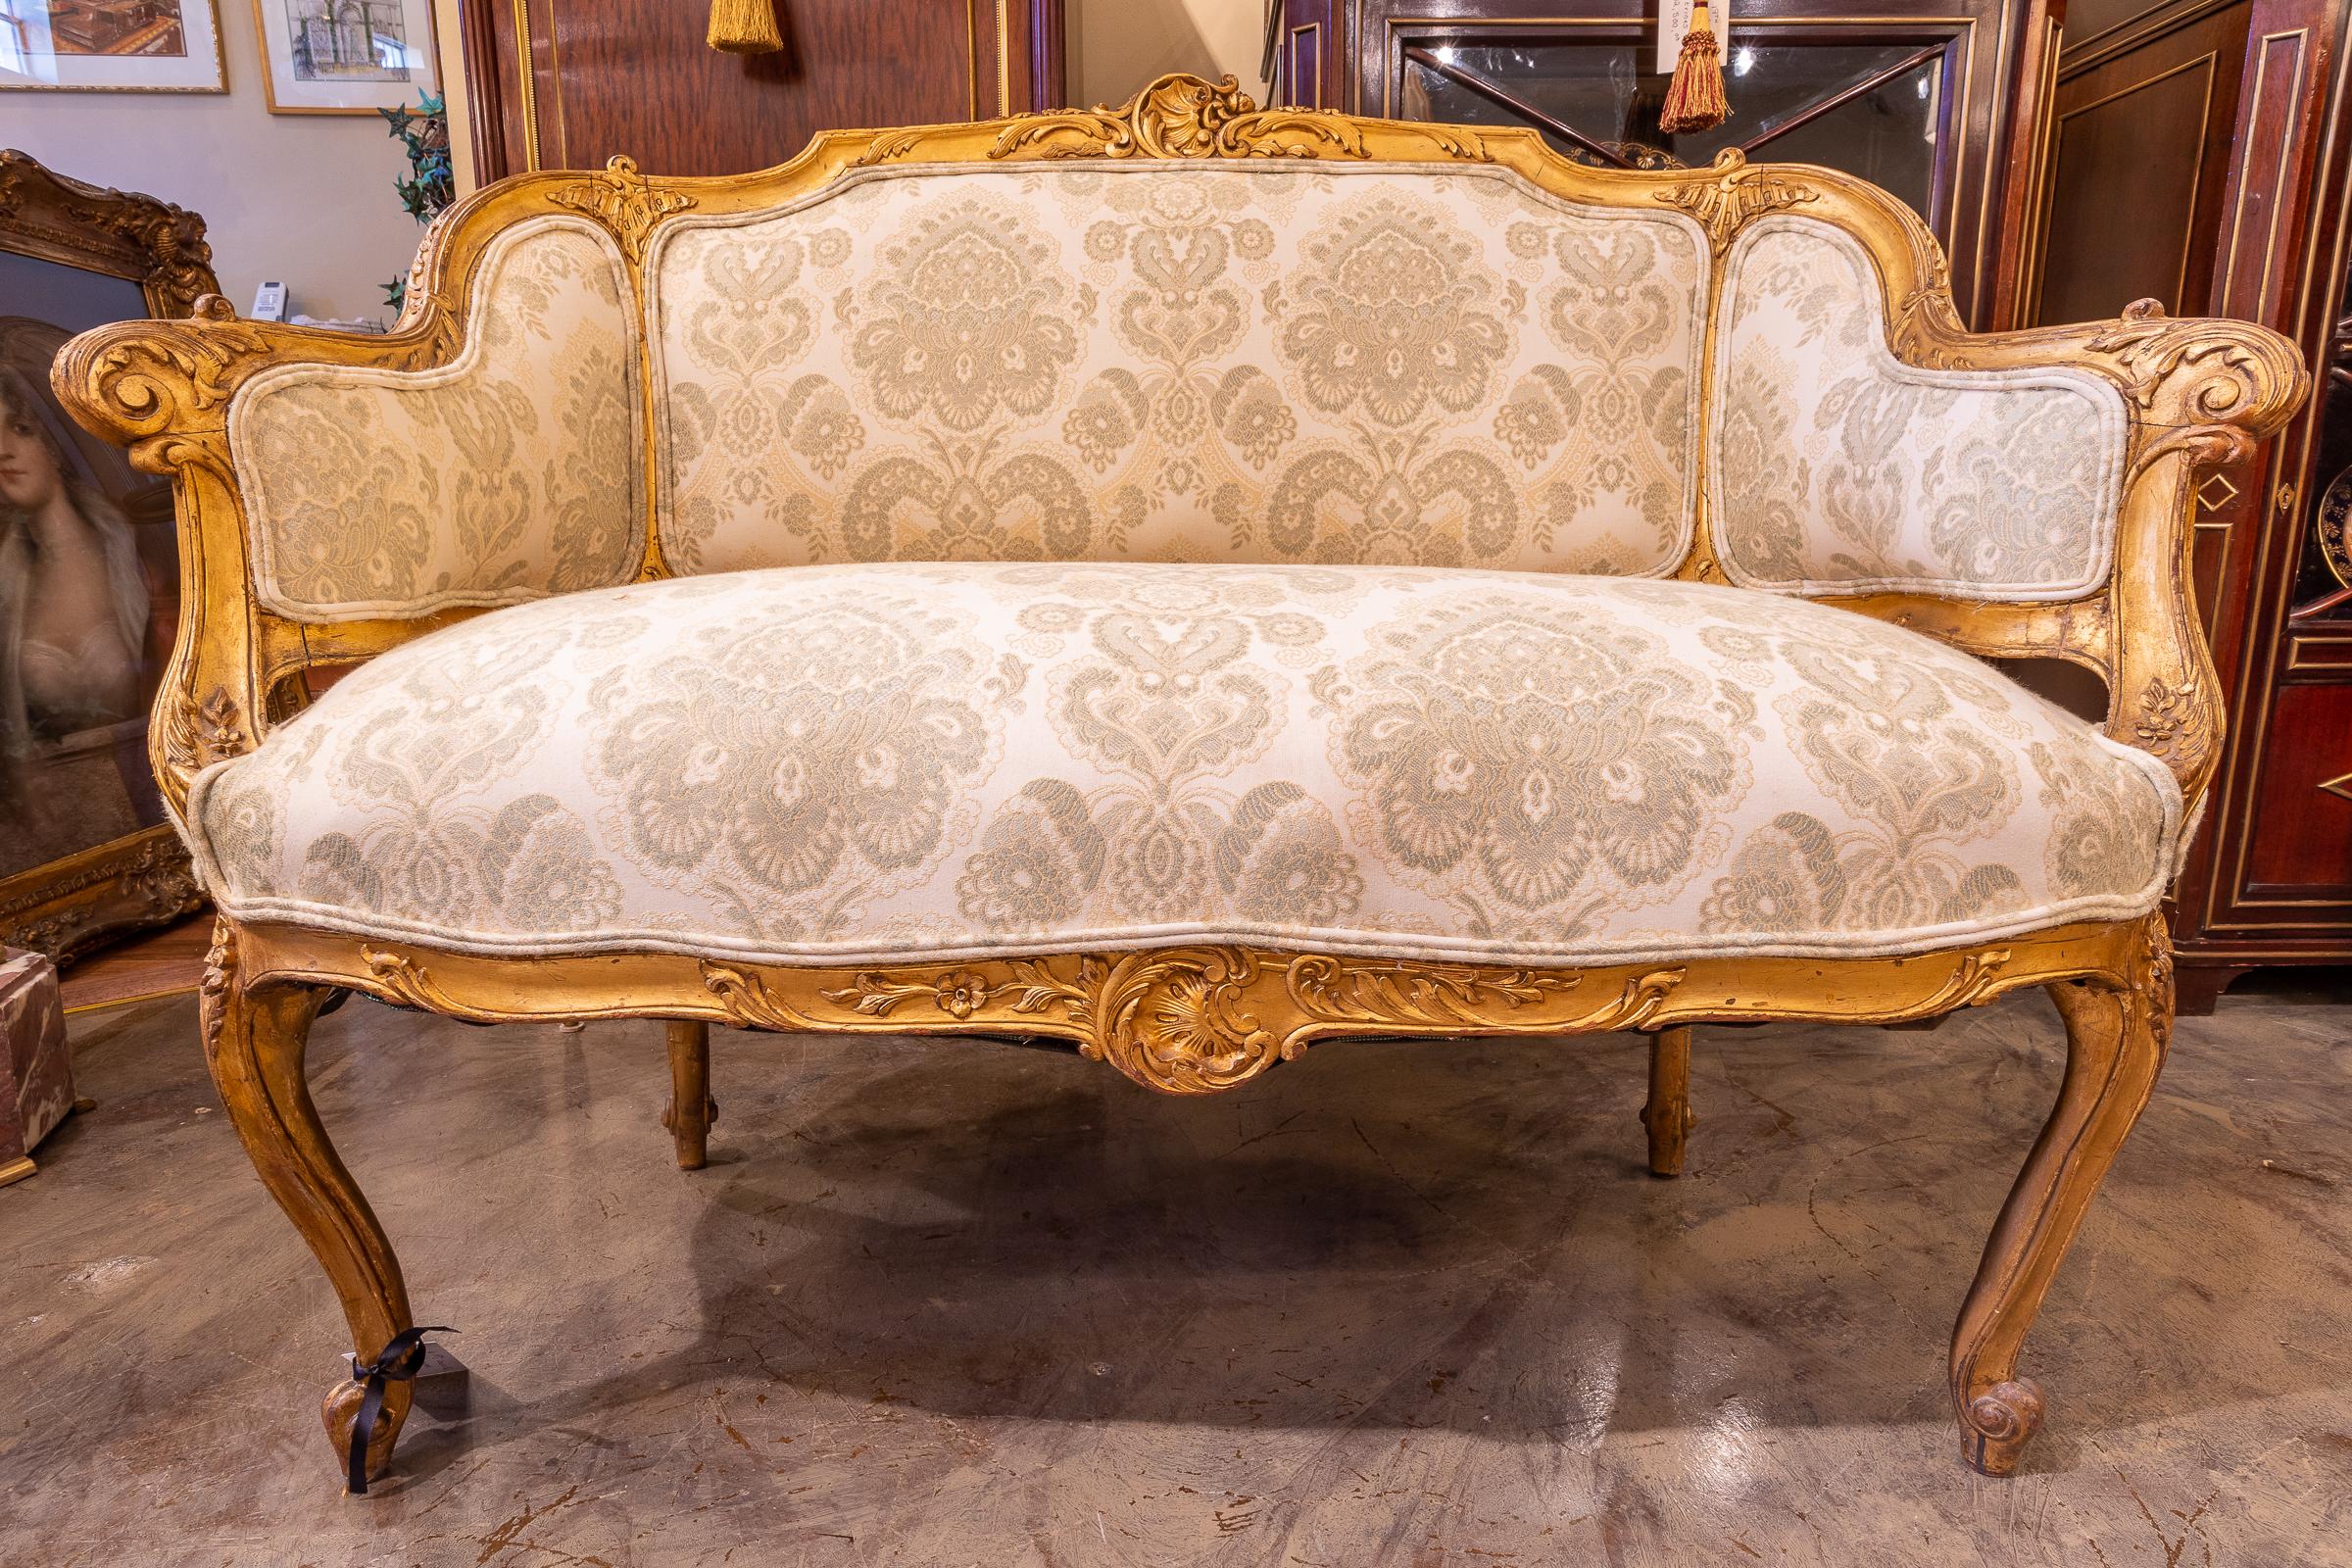 A fine small 19th century French Louis XV gilt hand carved settee. Fine gilding and detail.